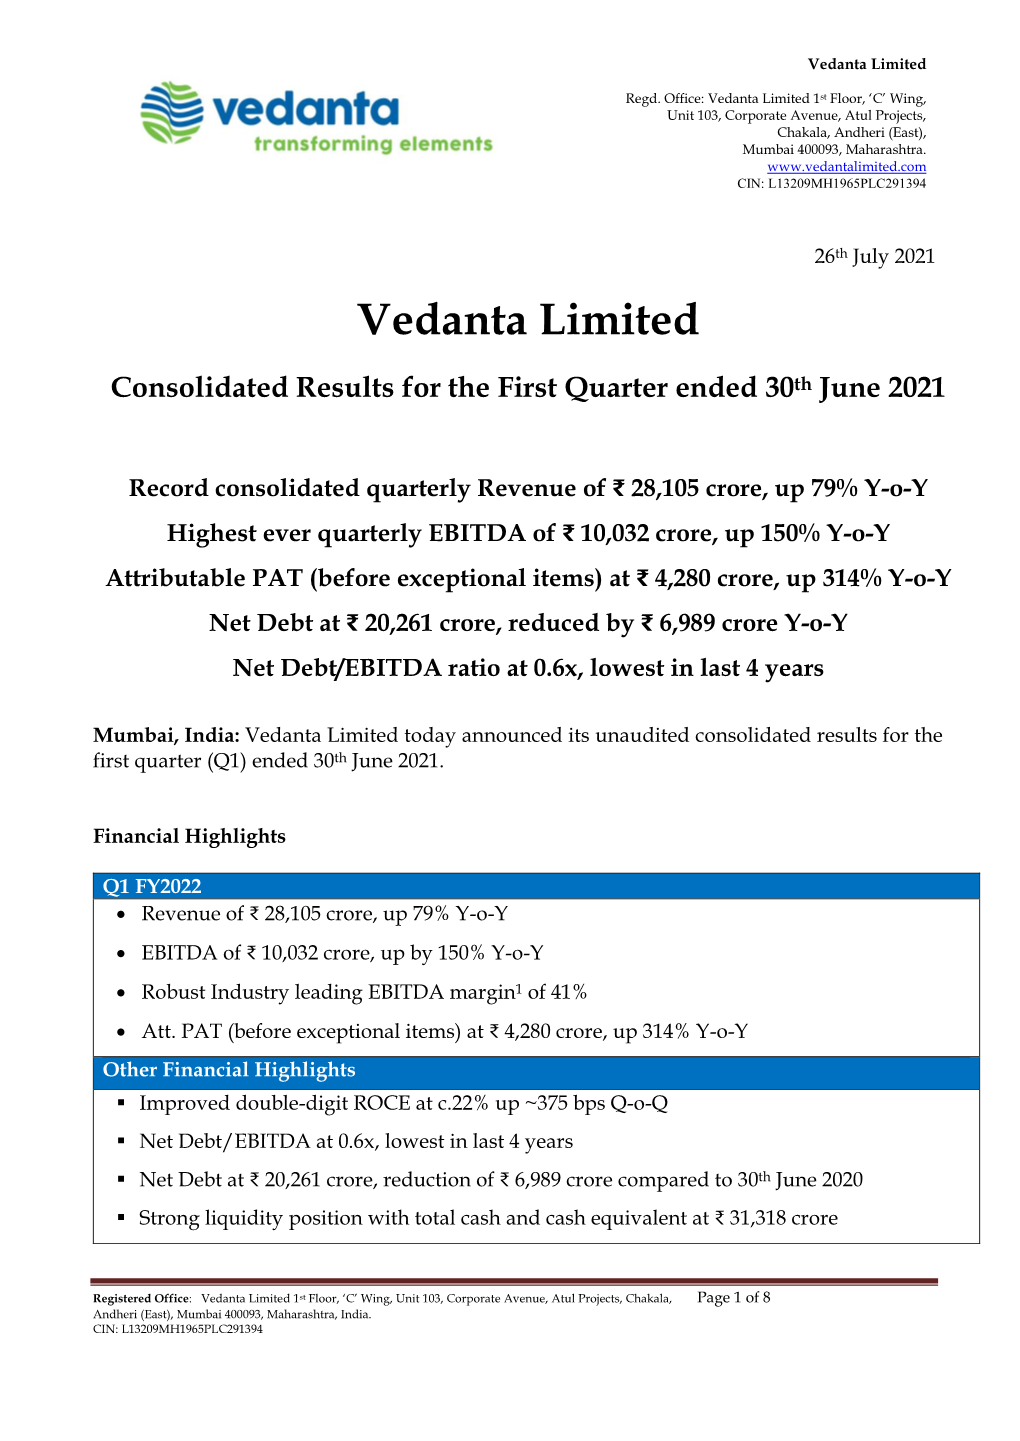 Consolidated Results for the First Quarter Ended 30Th June 2021